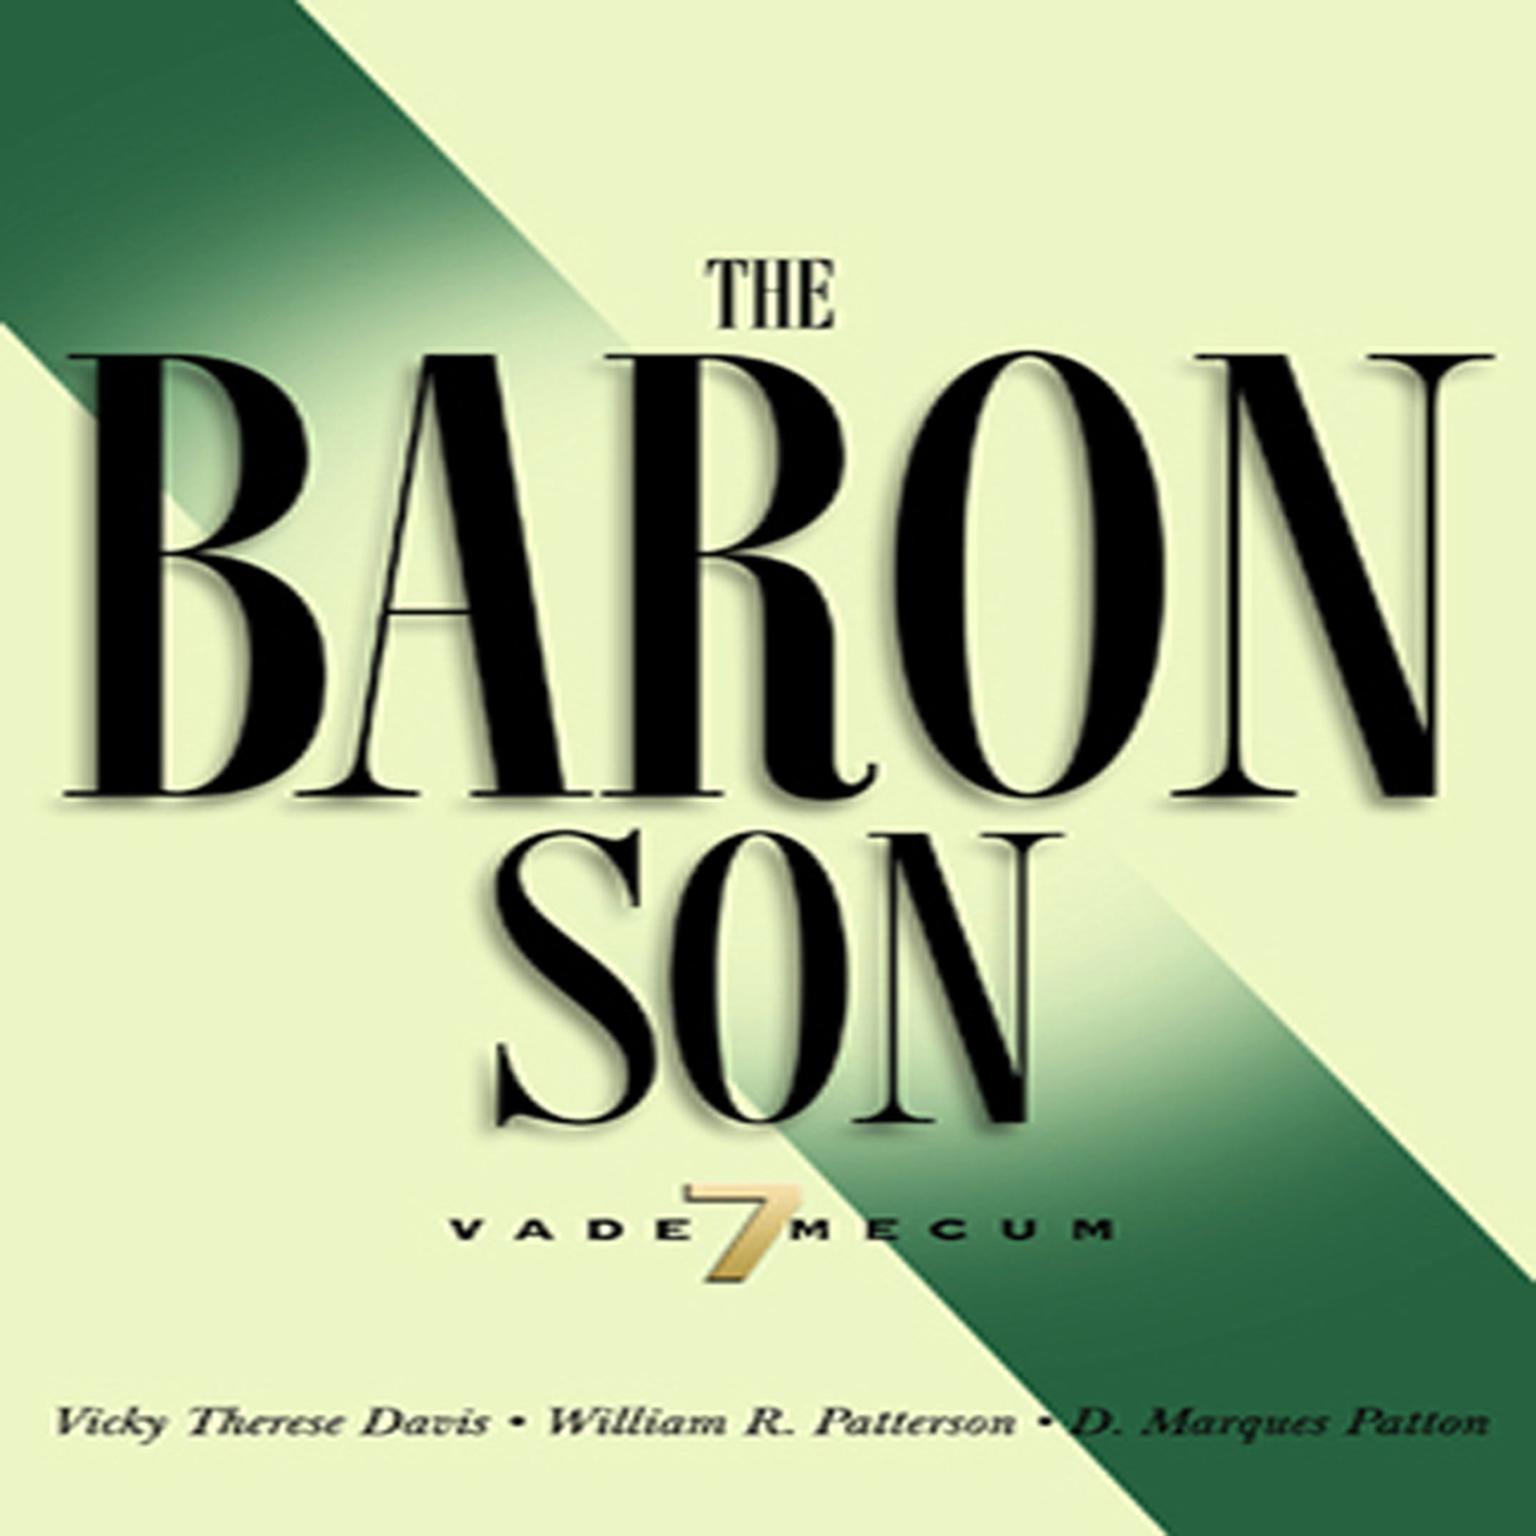 The Baron Son: Vade Mecum 7 Audiobook, by Vicky Therese Davis